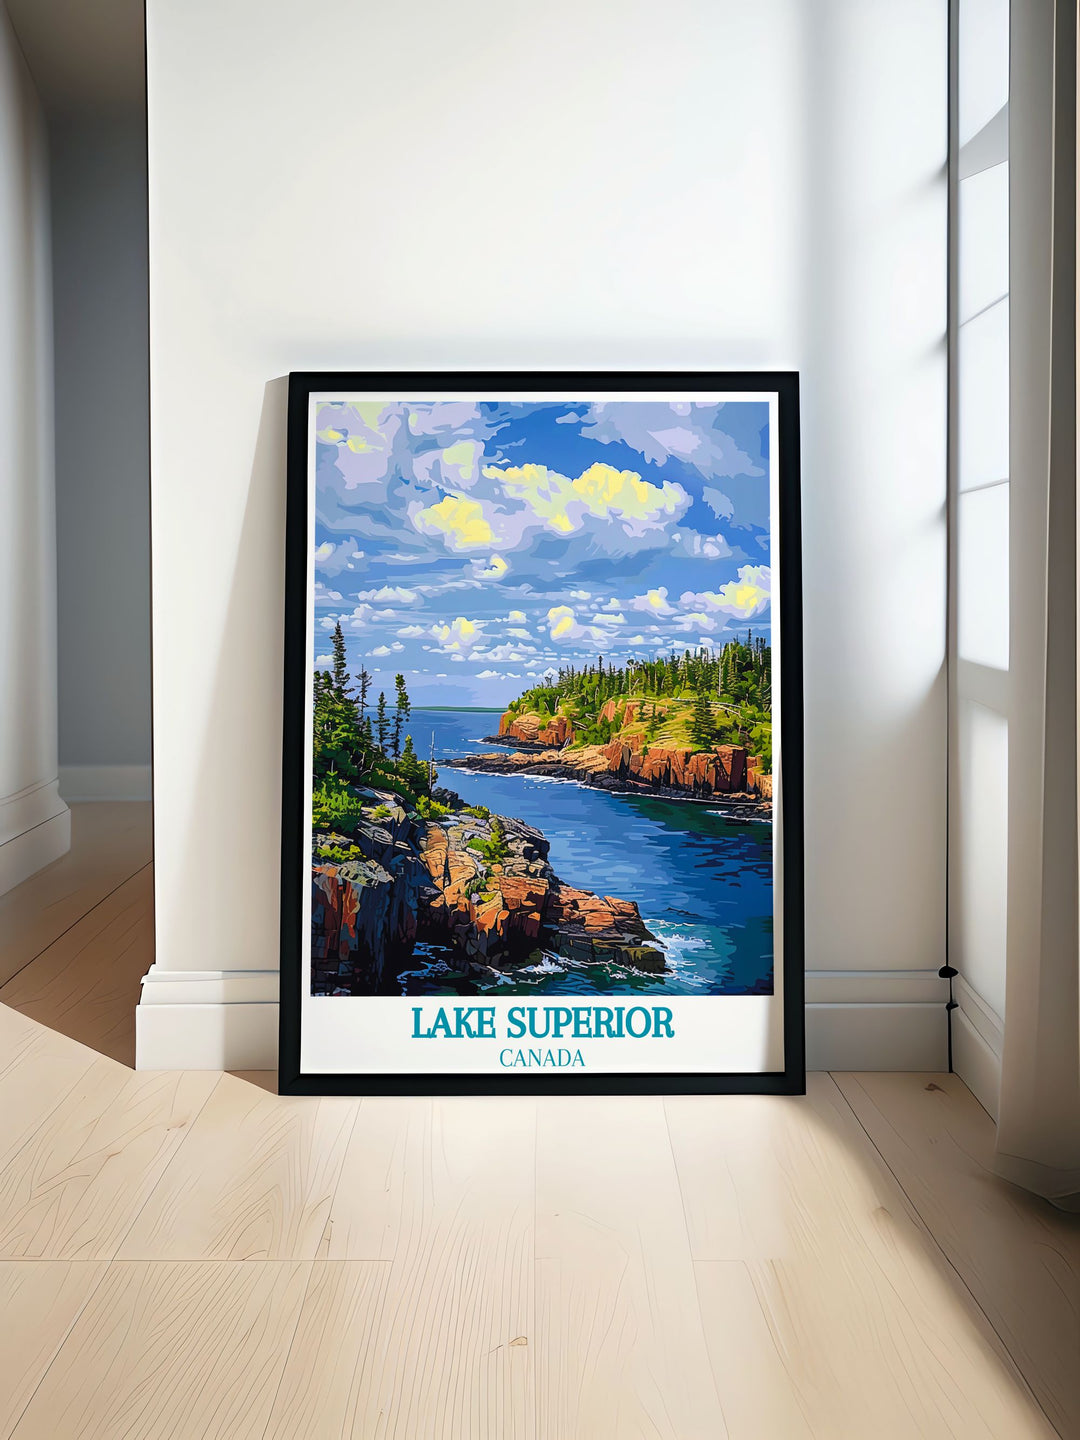 Lake Superiors historical significance captured in a travel poster, celebrating its role in the regions development and its natural beauty.